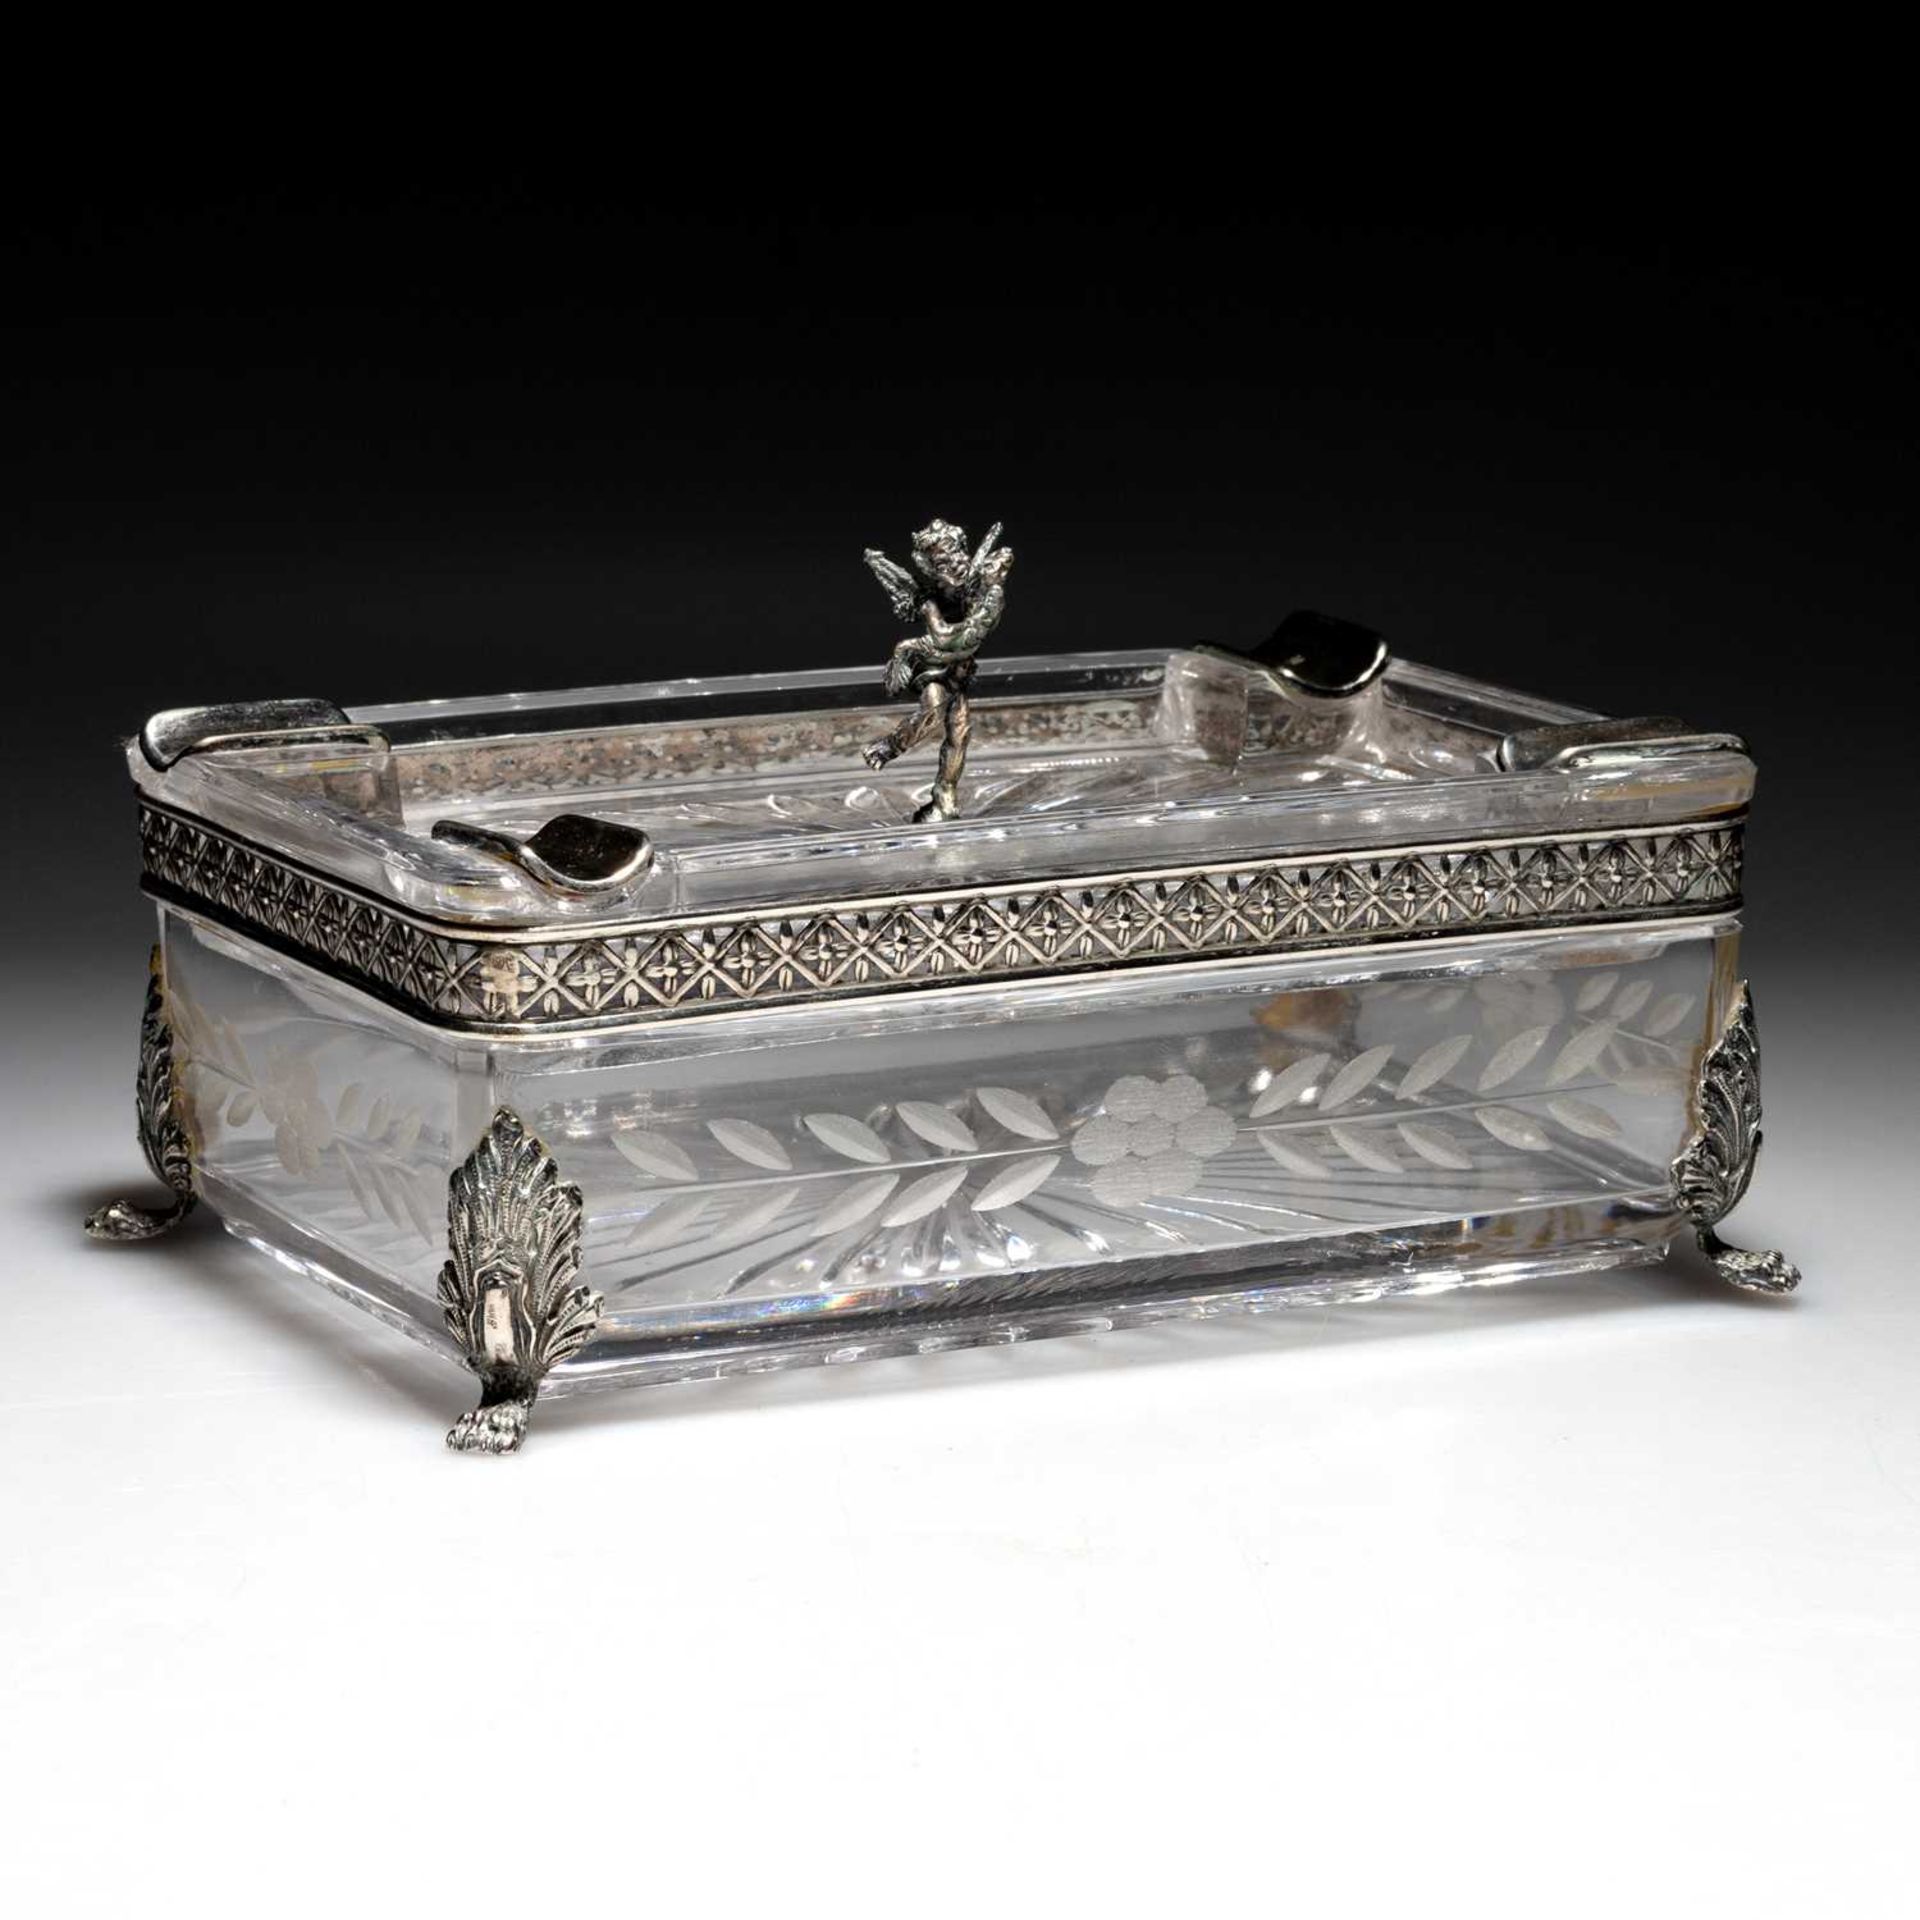 AN ITALIAN SILVER-MOUNTED GLASS CIGARETTE BOX - Image 3 of 3